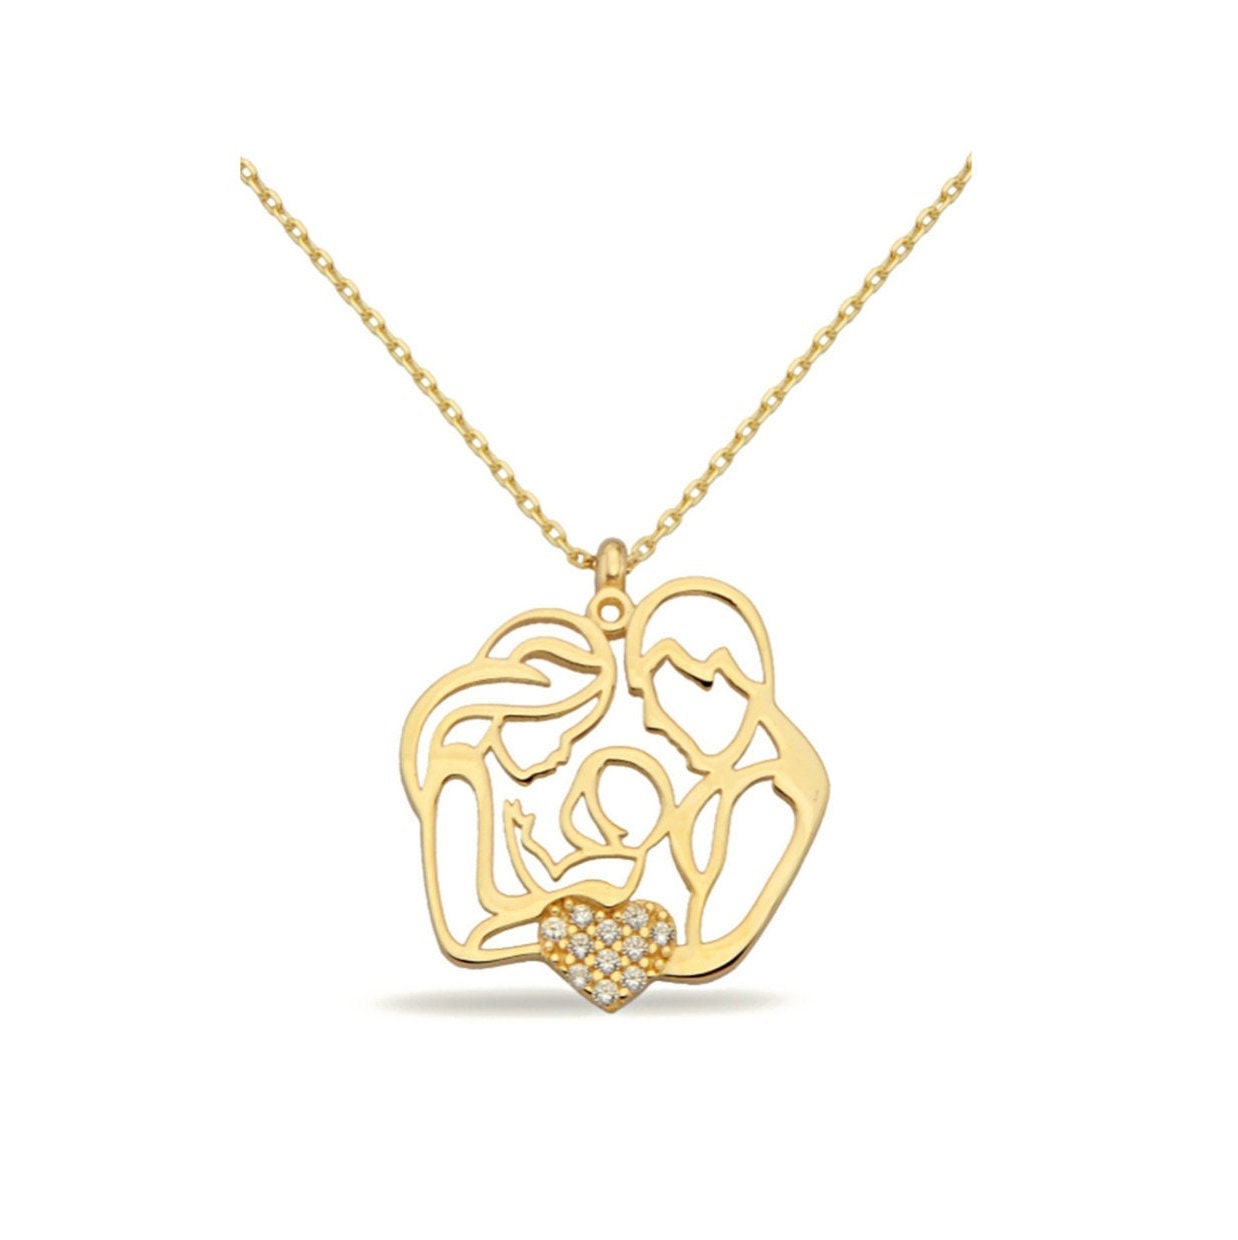 Oval 14K Gold Family Crest Pendant with 18 inch Chain